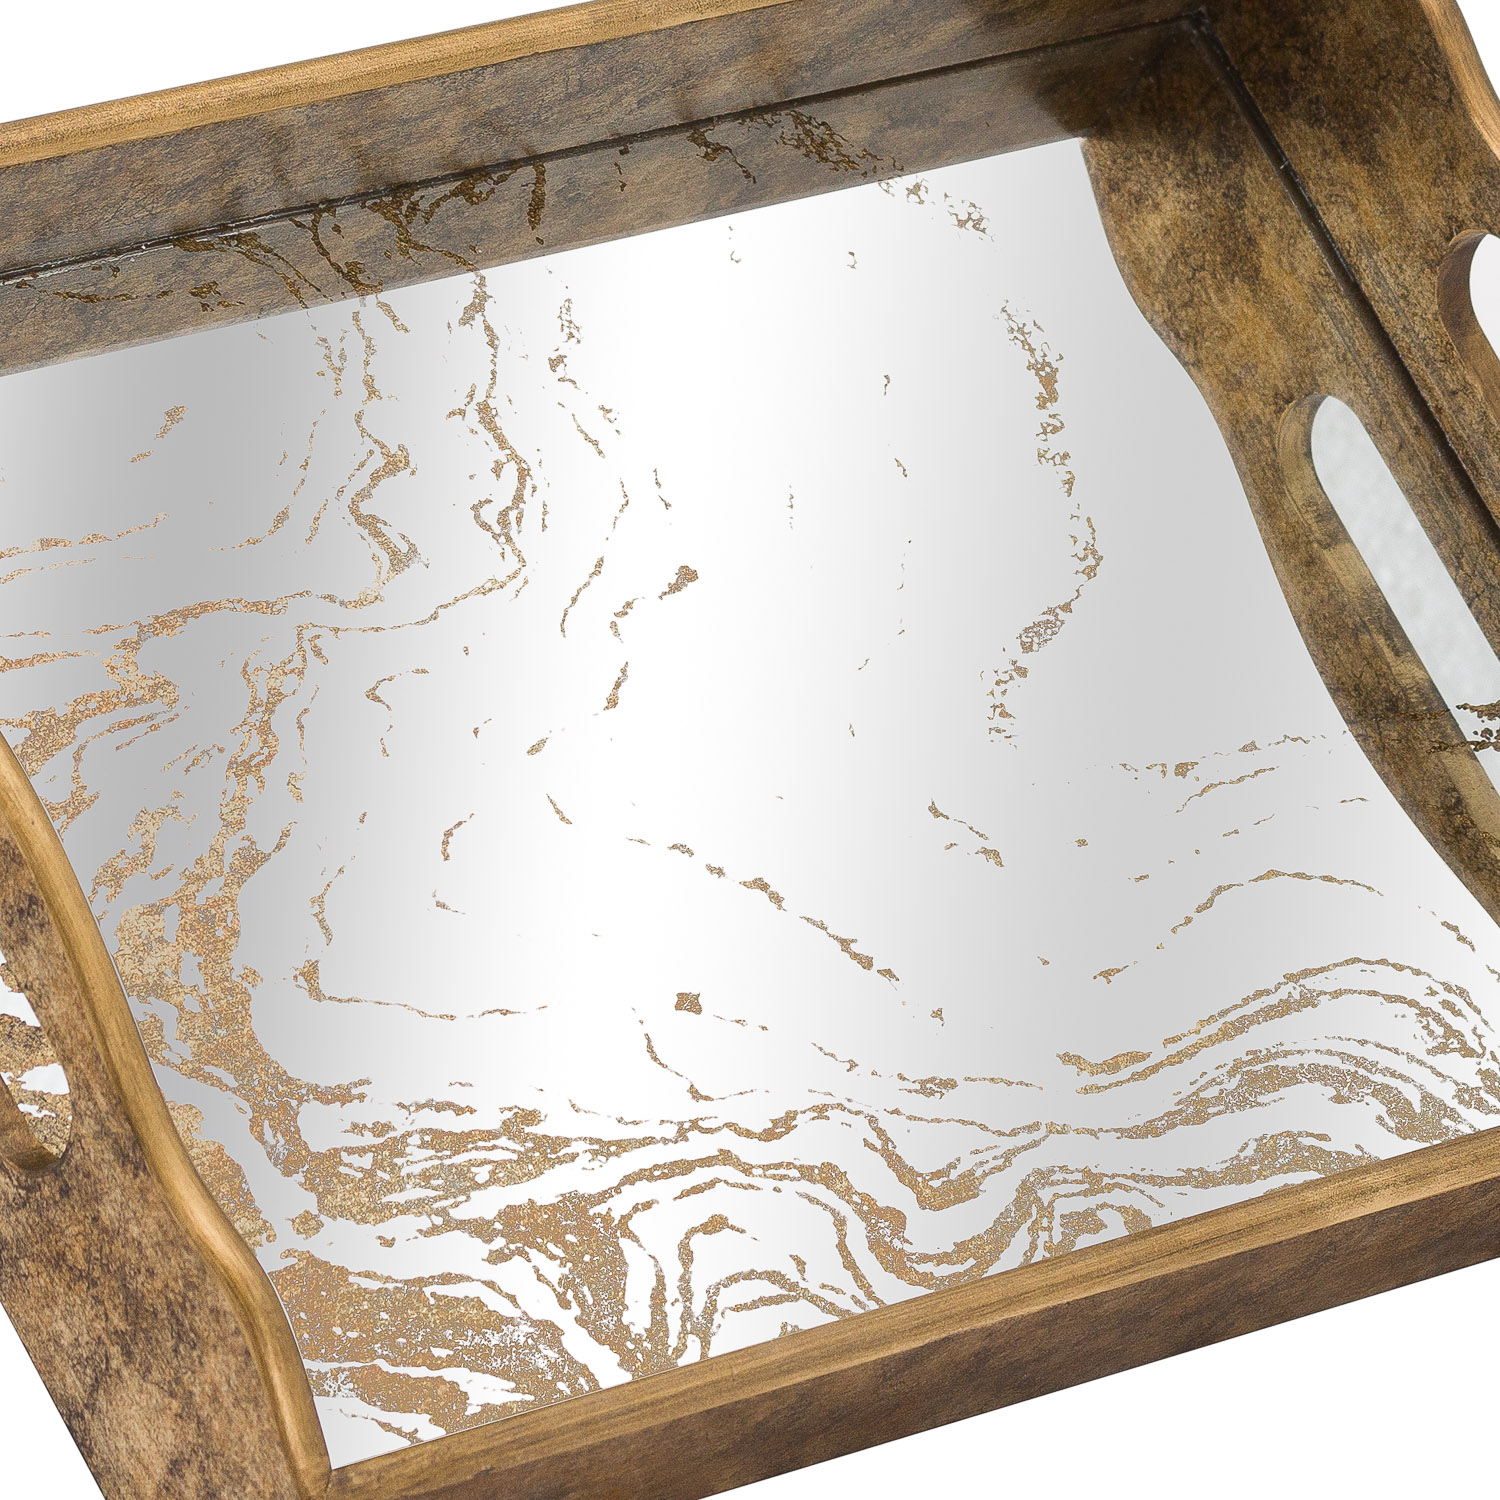 Augustus Mirrored Tray With Marbling Effect - Image 2